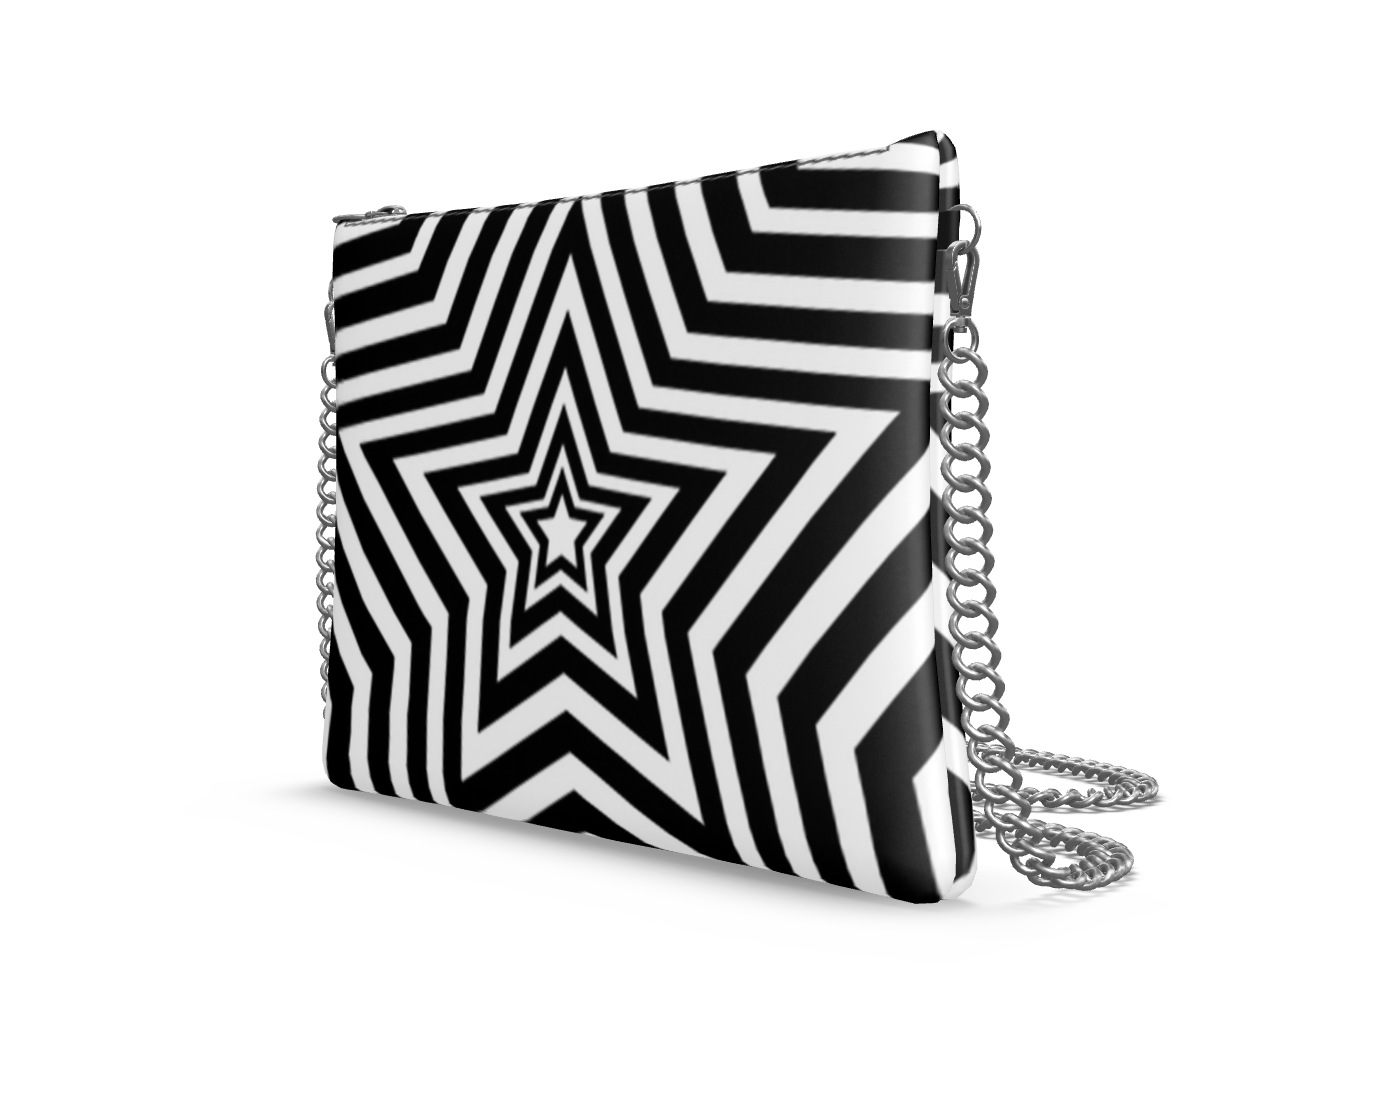 UNTITLED BOUTIQUE Black and White Leather Star Crossbody Bag with Silver Chain - Limited Edition